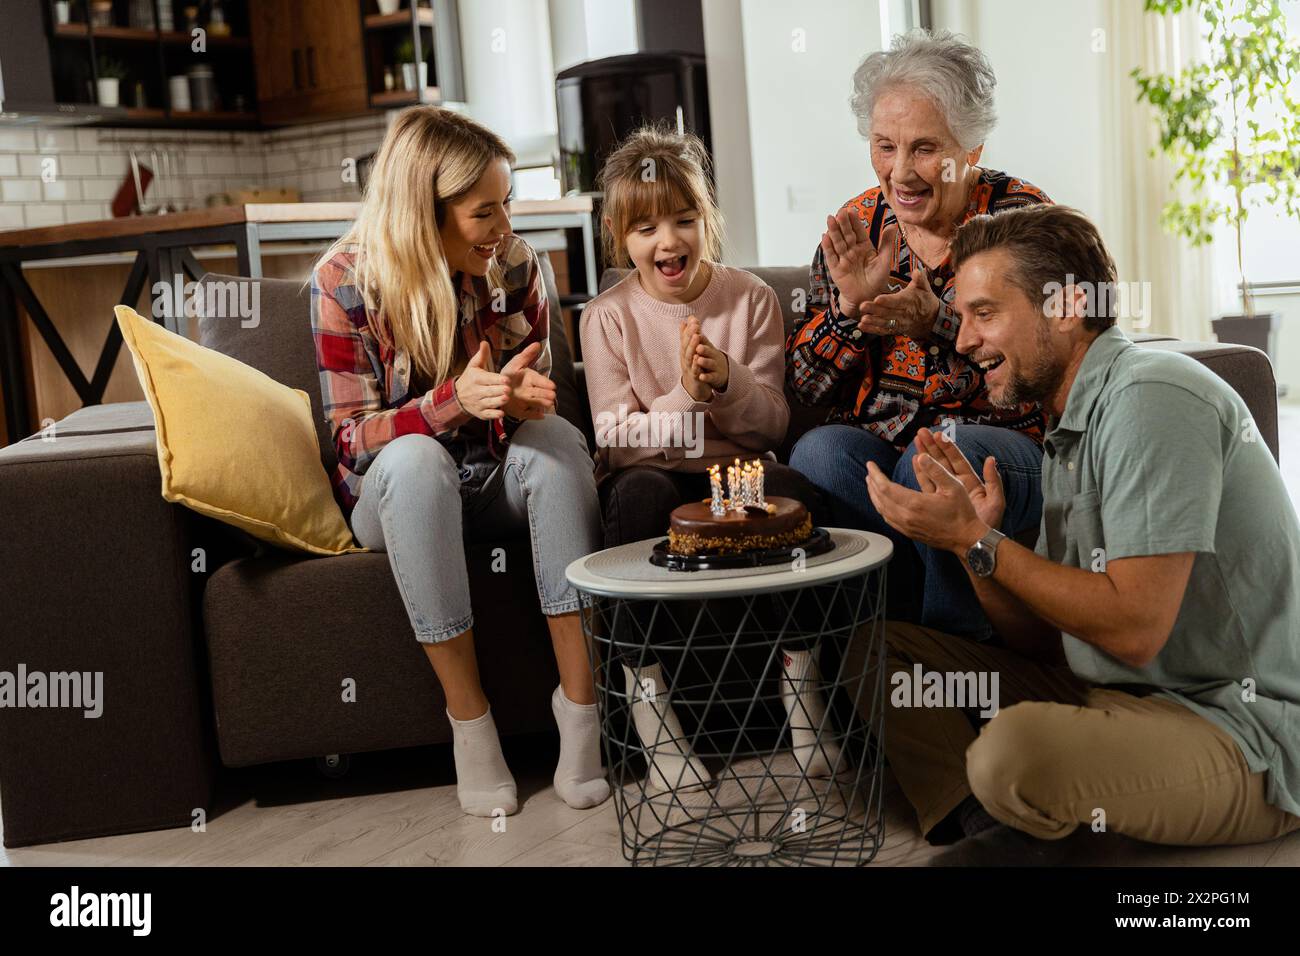 Heartwarming scene unfolds as a multi-generational family gathers on a couch to present a birthday cake to a delighted grandmother, creating memories Stock Photo